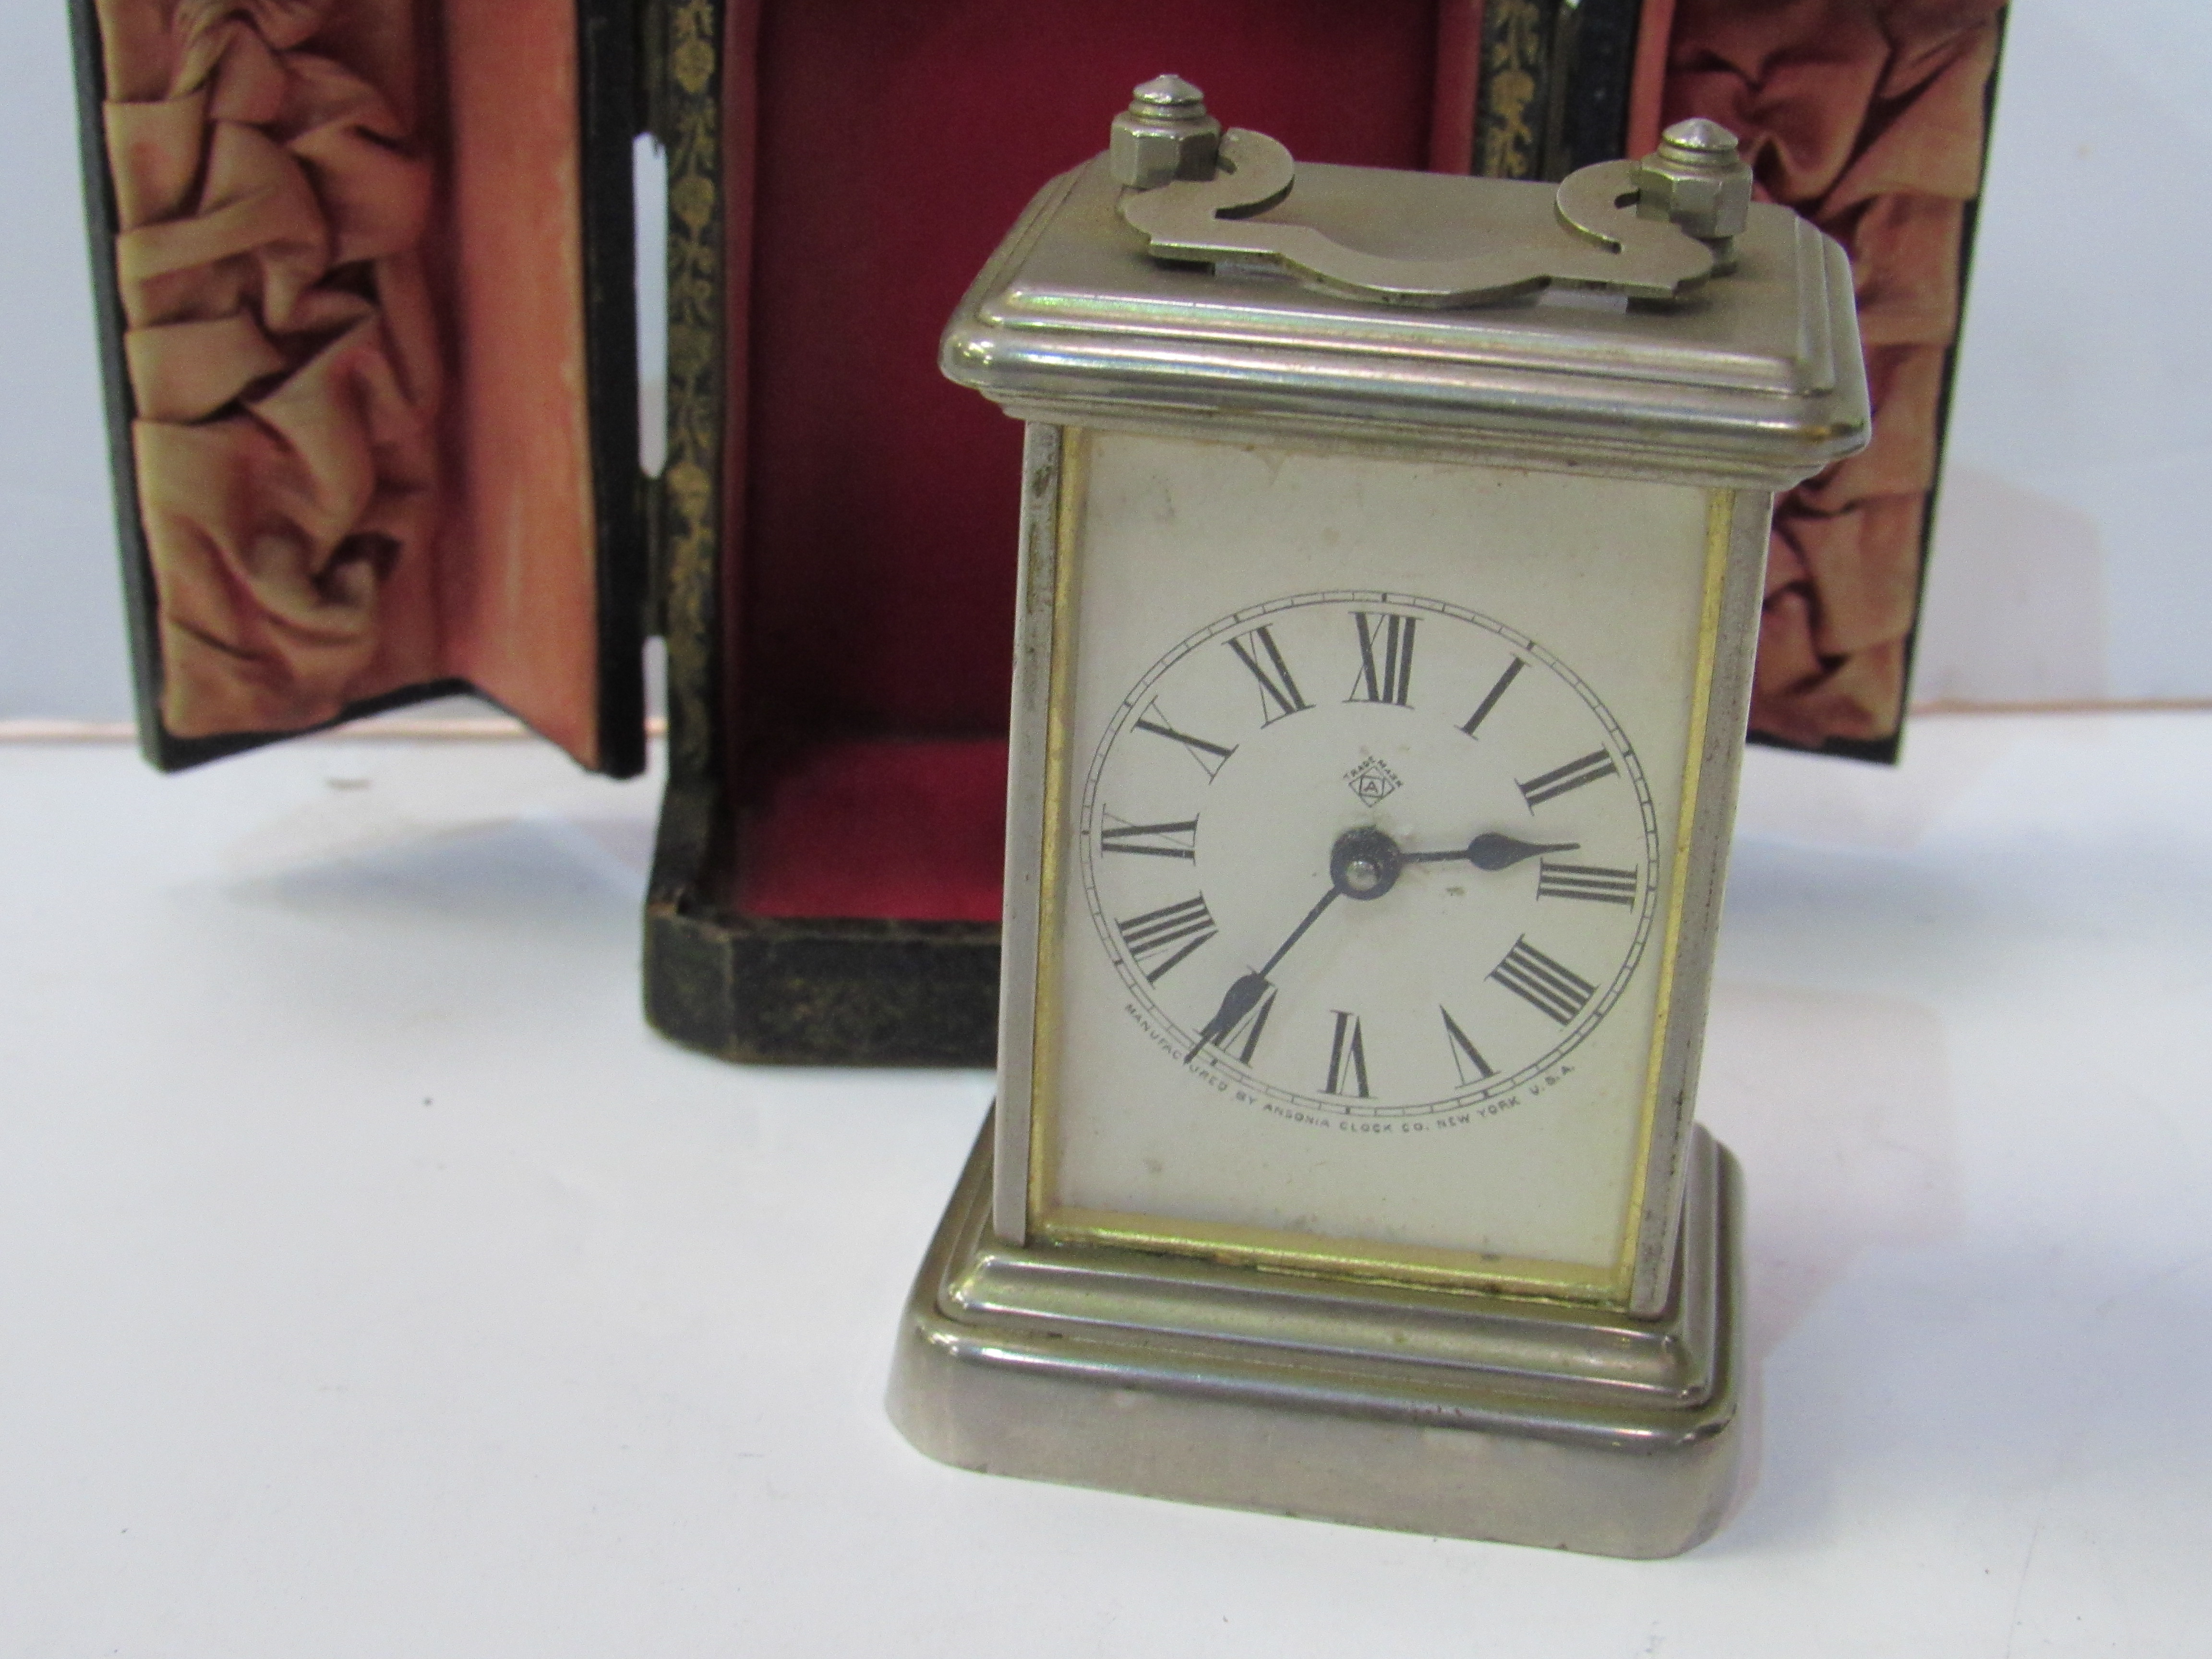 Miniature silver cased carriage clock by Ansonia Clock Co. New York in original leather-covered case